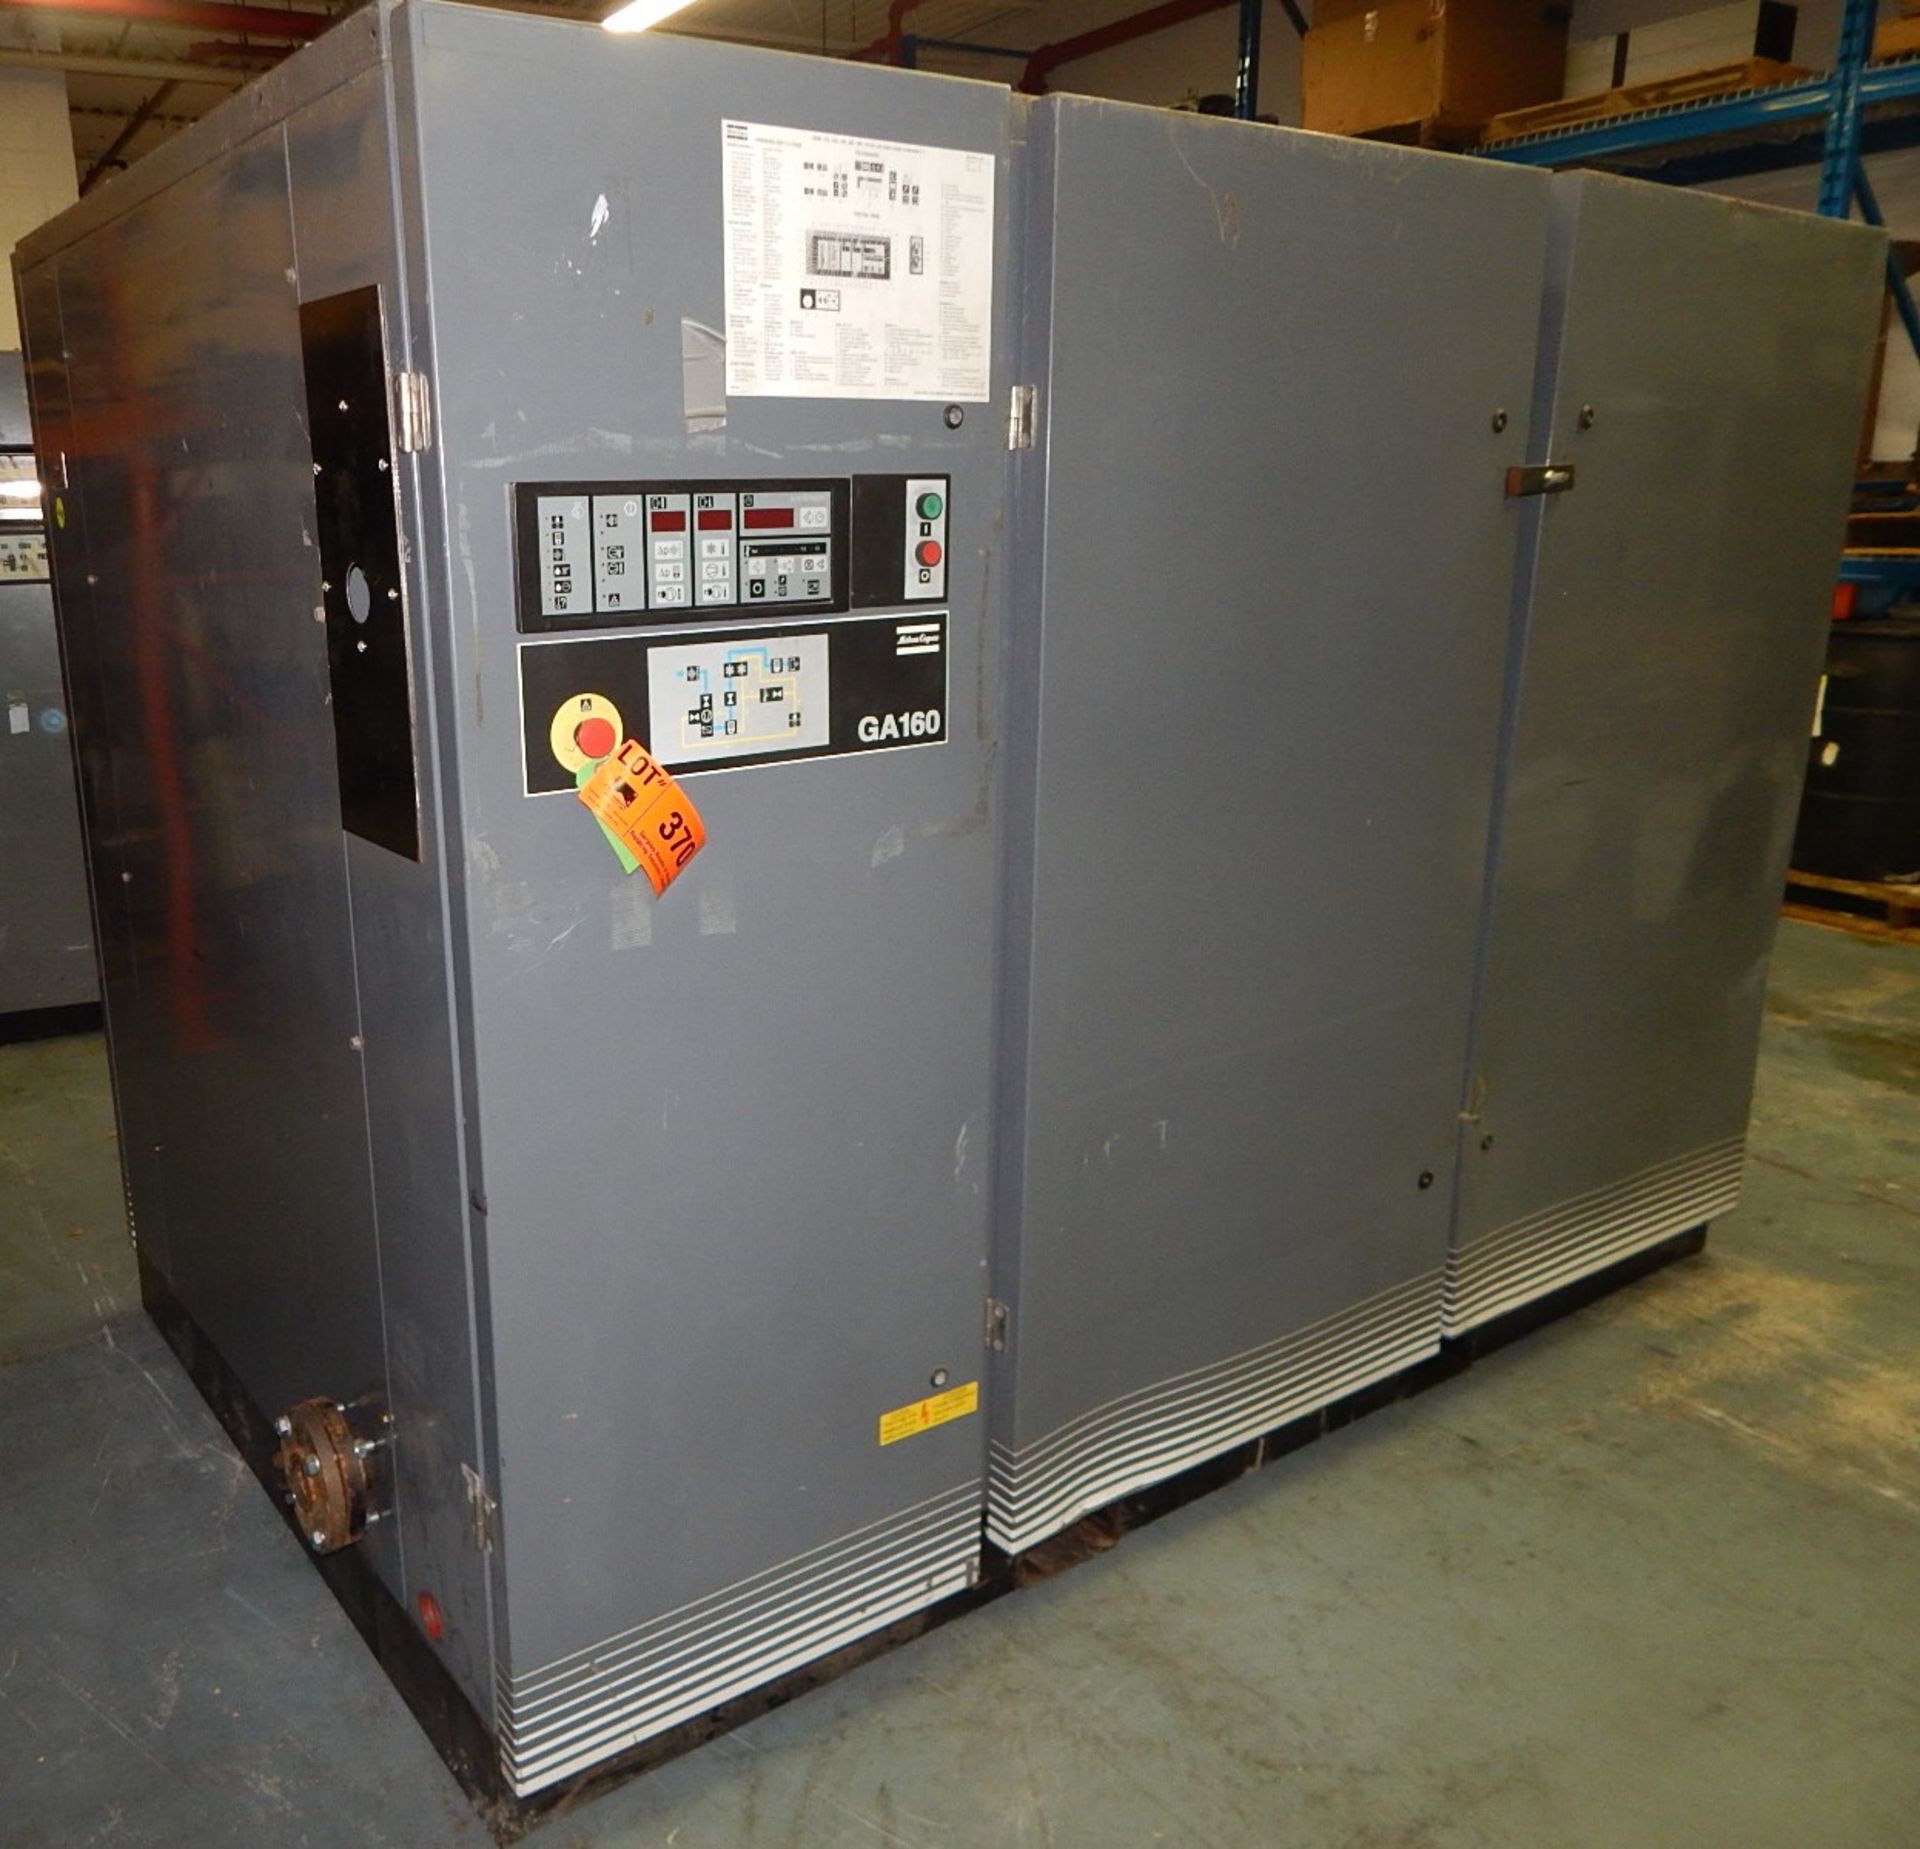 ATLAS COPCO GA160 ROTARY SCREW AIR COMPRESSORS WITH 200 HP, 157 PSI, S/N: AIF.018745 (CI) [RIGGING - Image 2 of 7